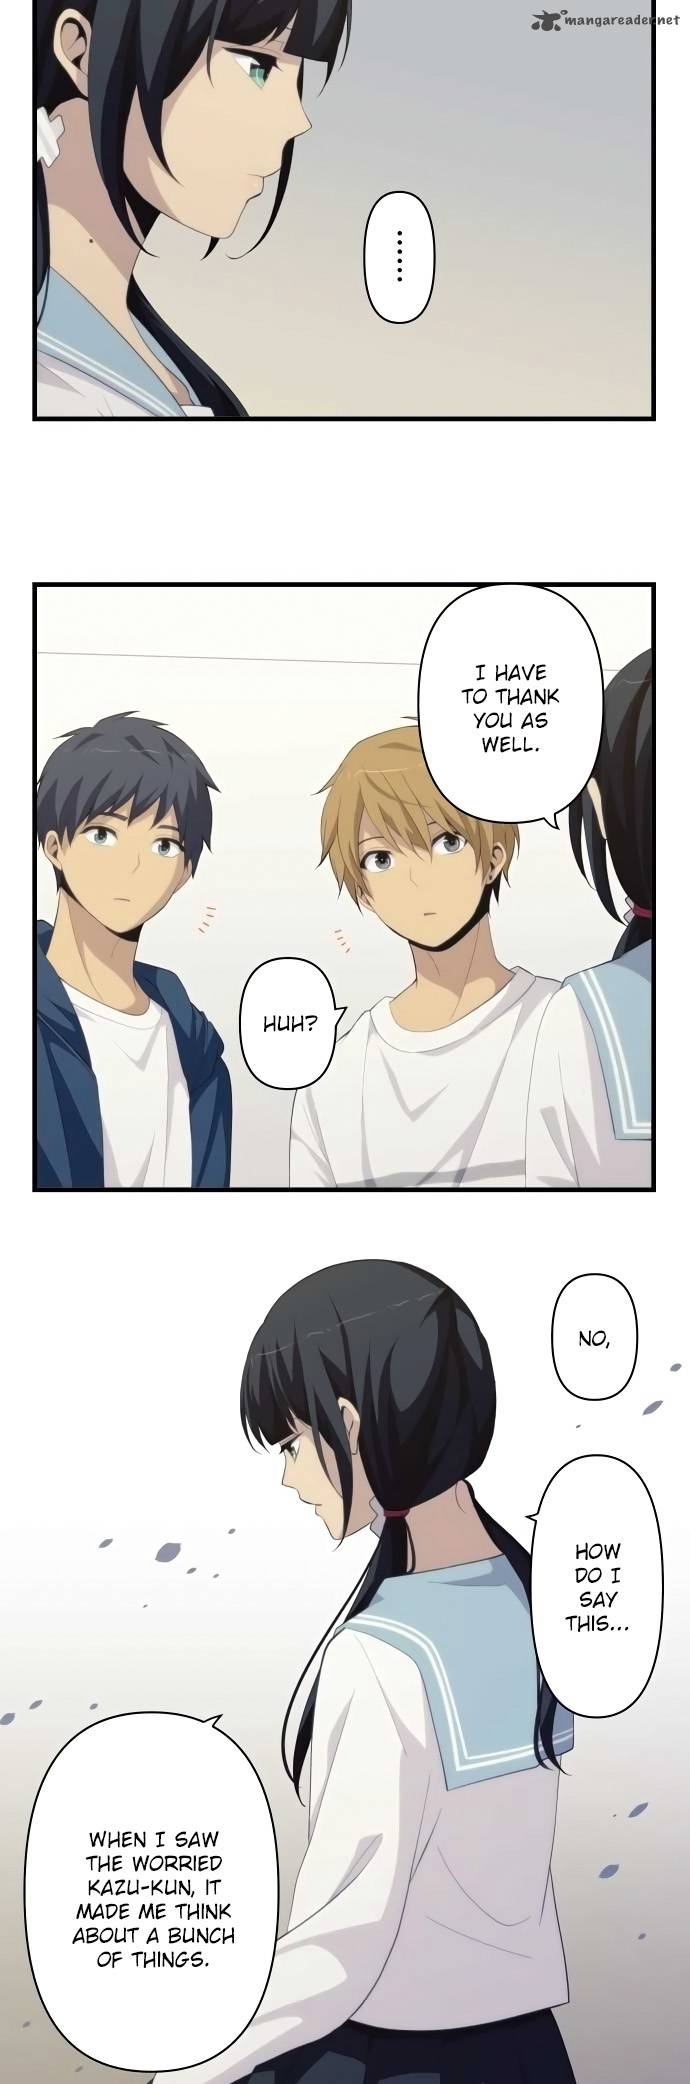 Relife 171 3